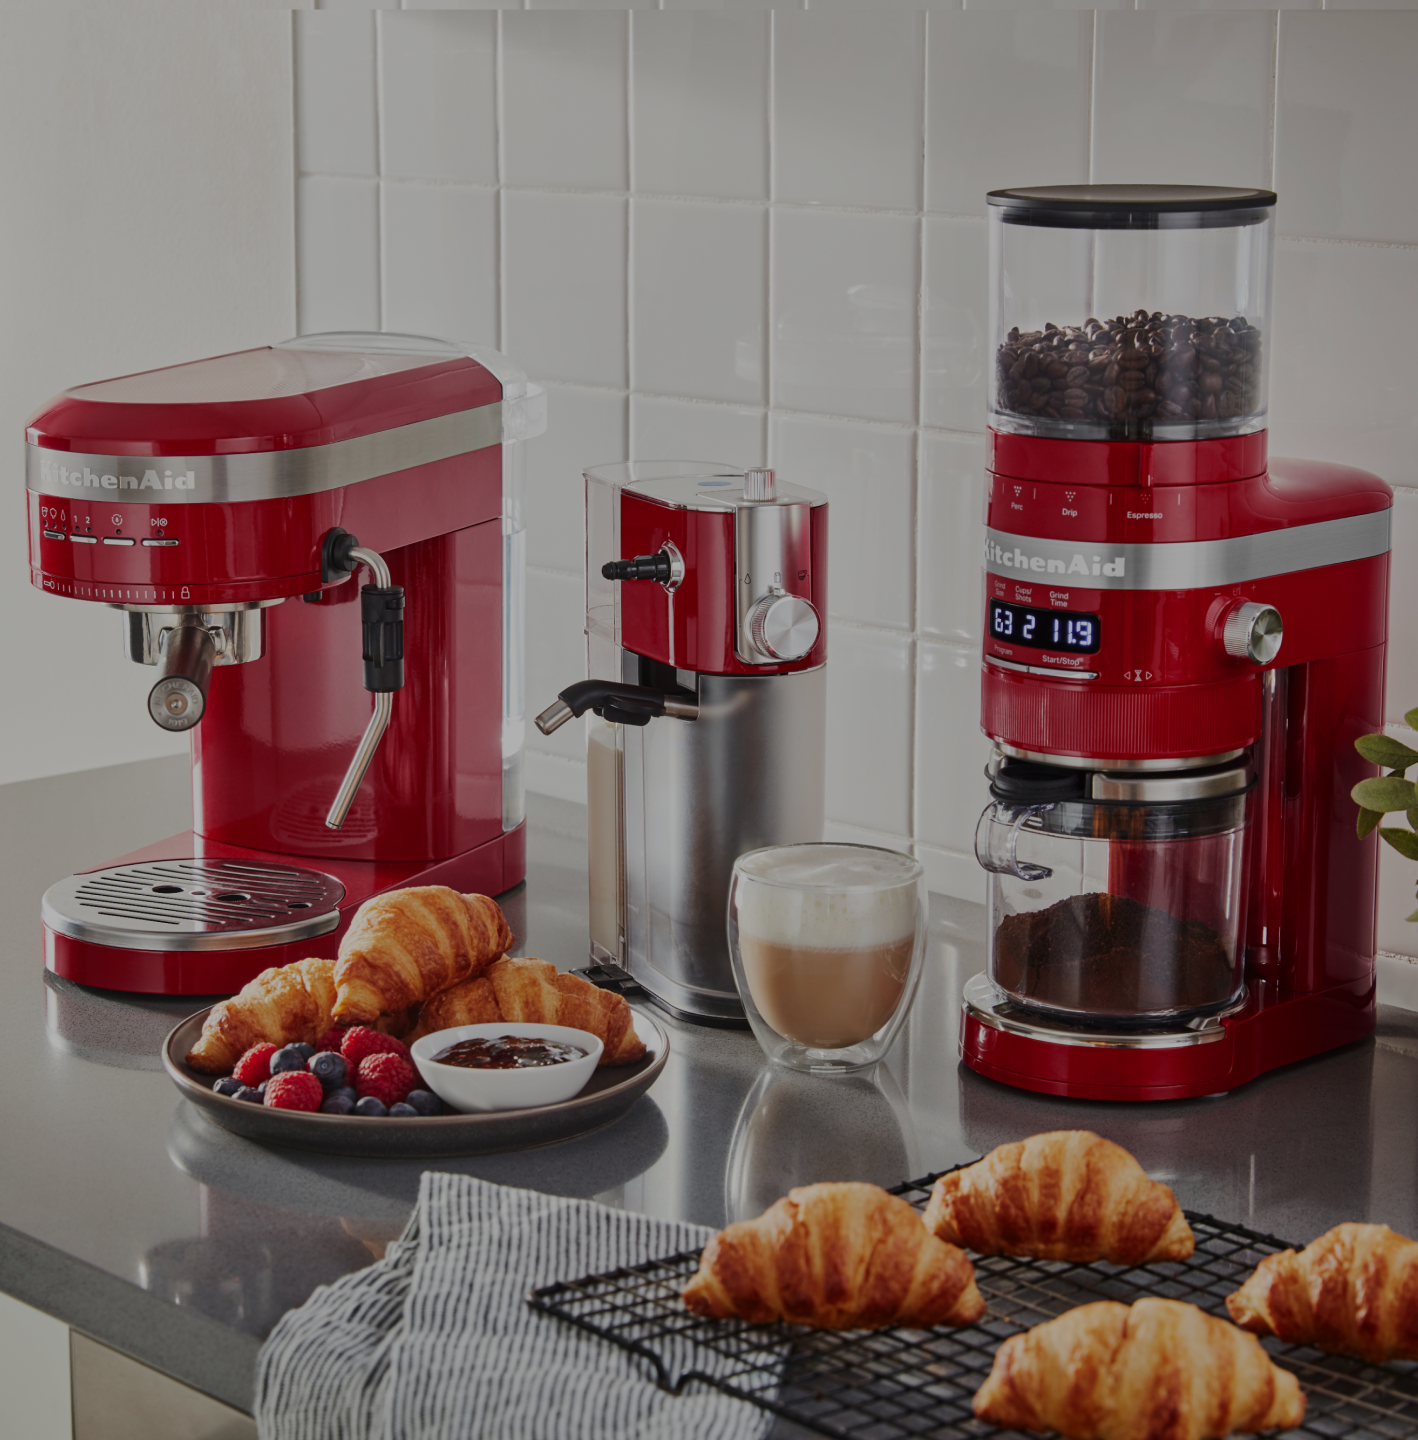 A close-up of a kitchen countertop with two red KitchenAid® countertop appliances.